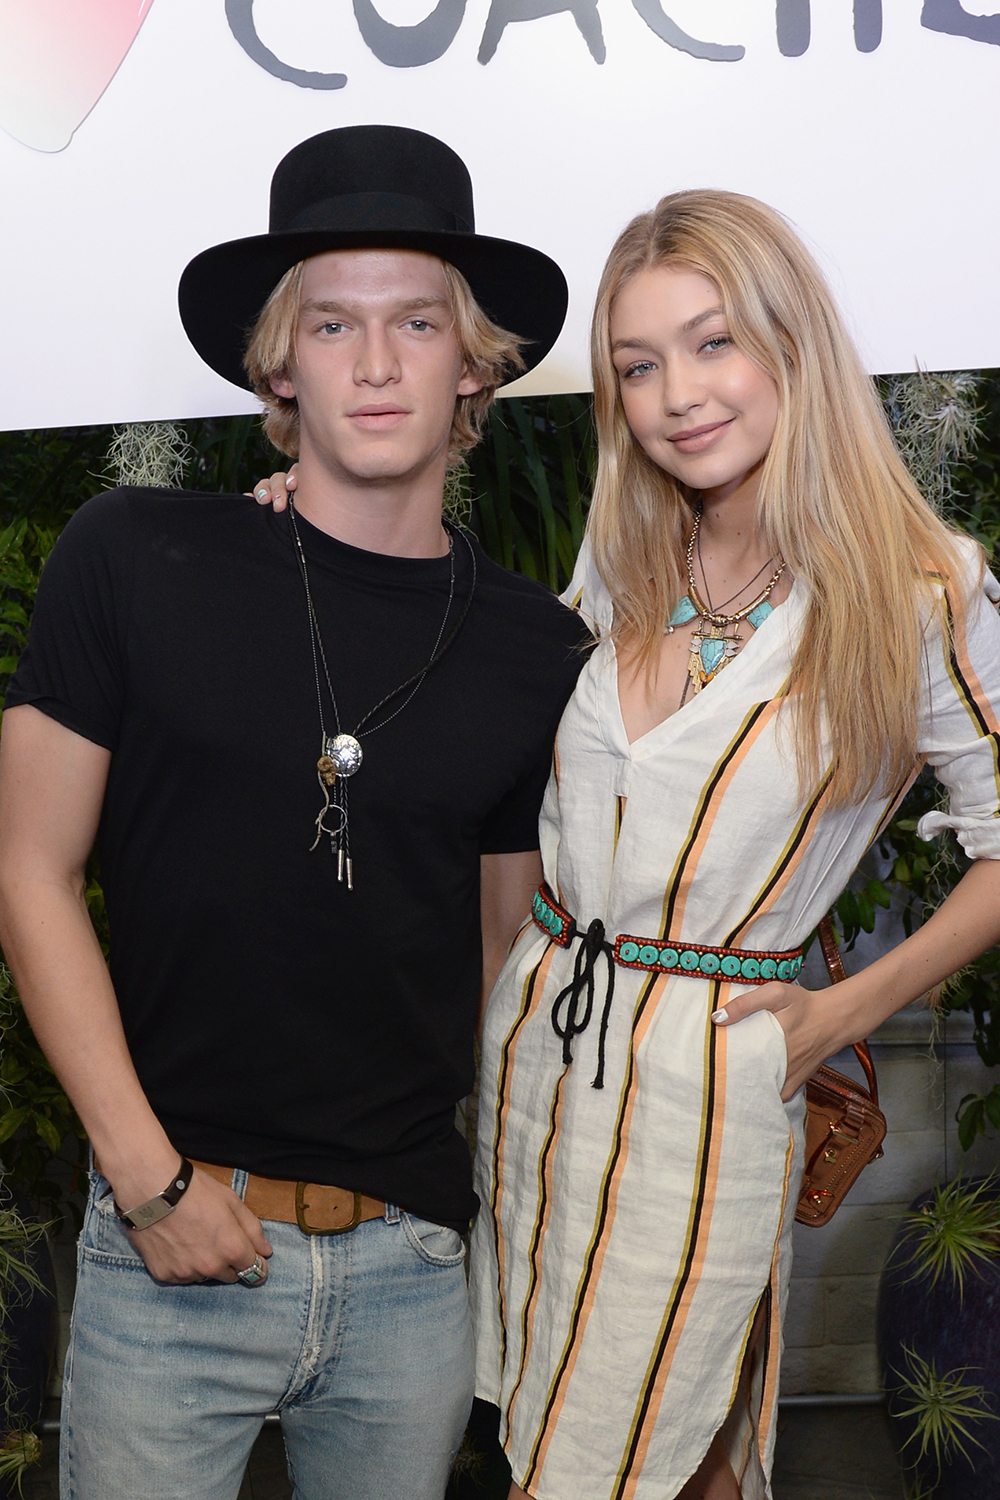 Just before Gigi Hadid started her world domination in the modelling industry, she was dating Australian singer Cody Simpson. The couple were together for four years before breaking up in 2015.